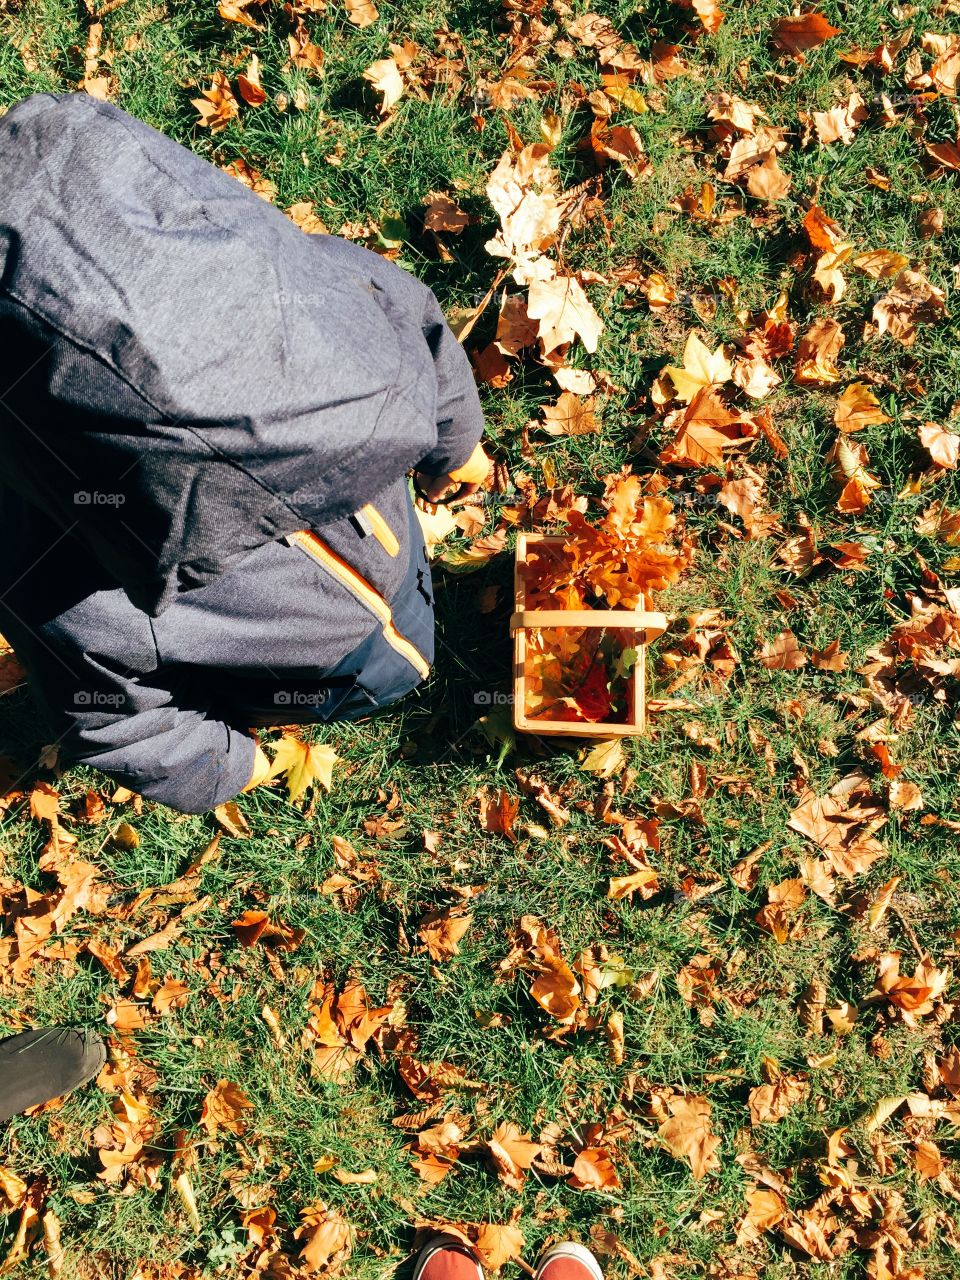 Boy in hood standing with basket of autumn leaf